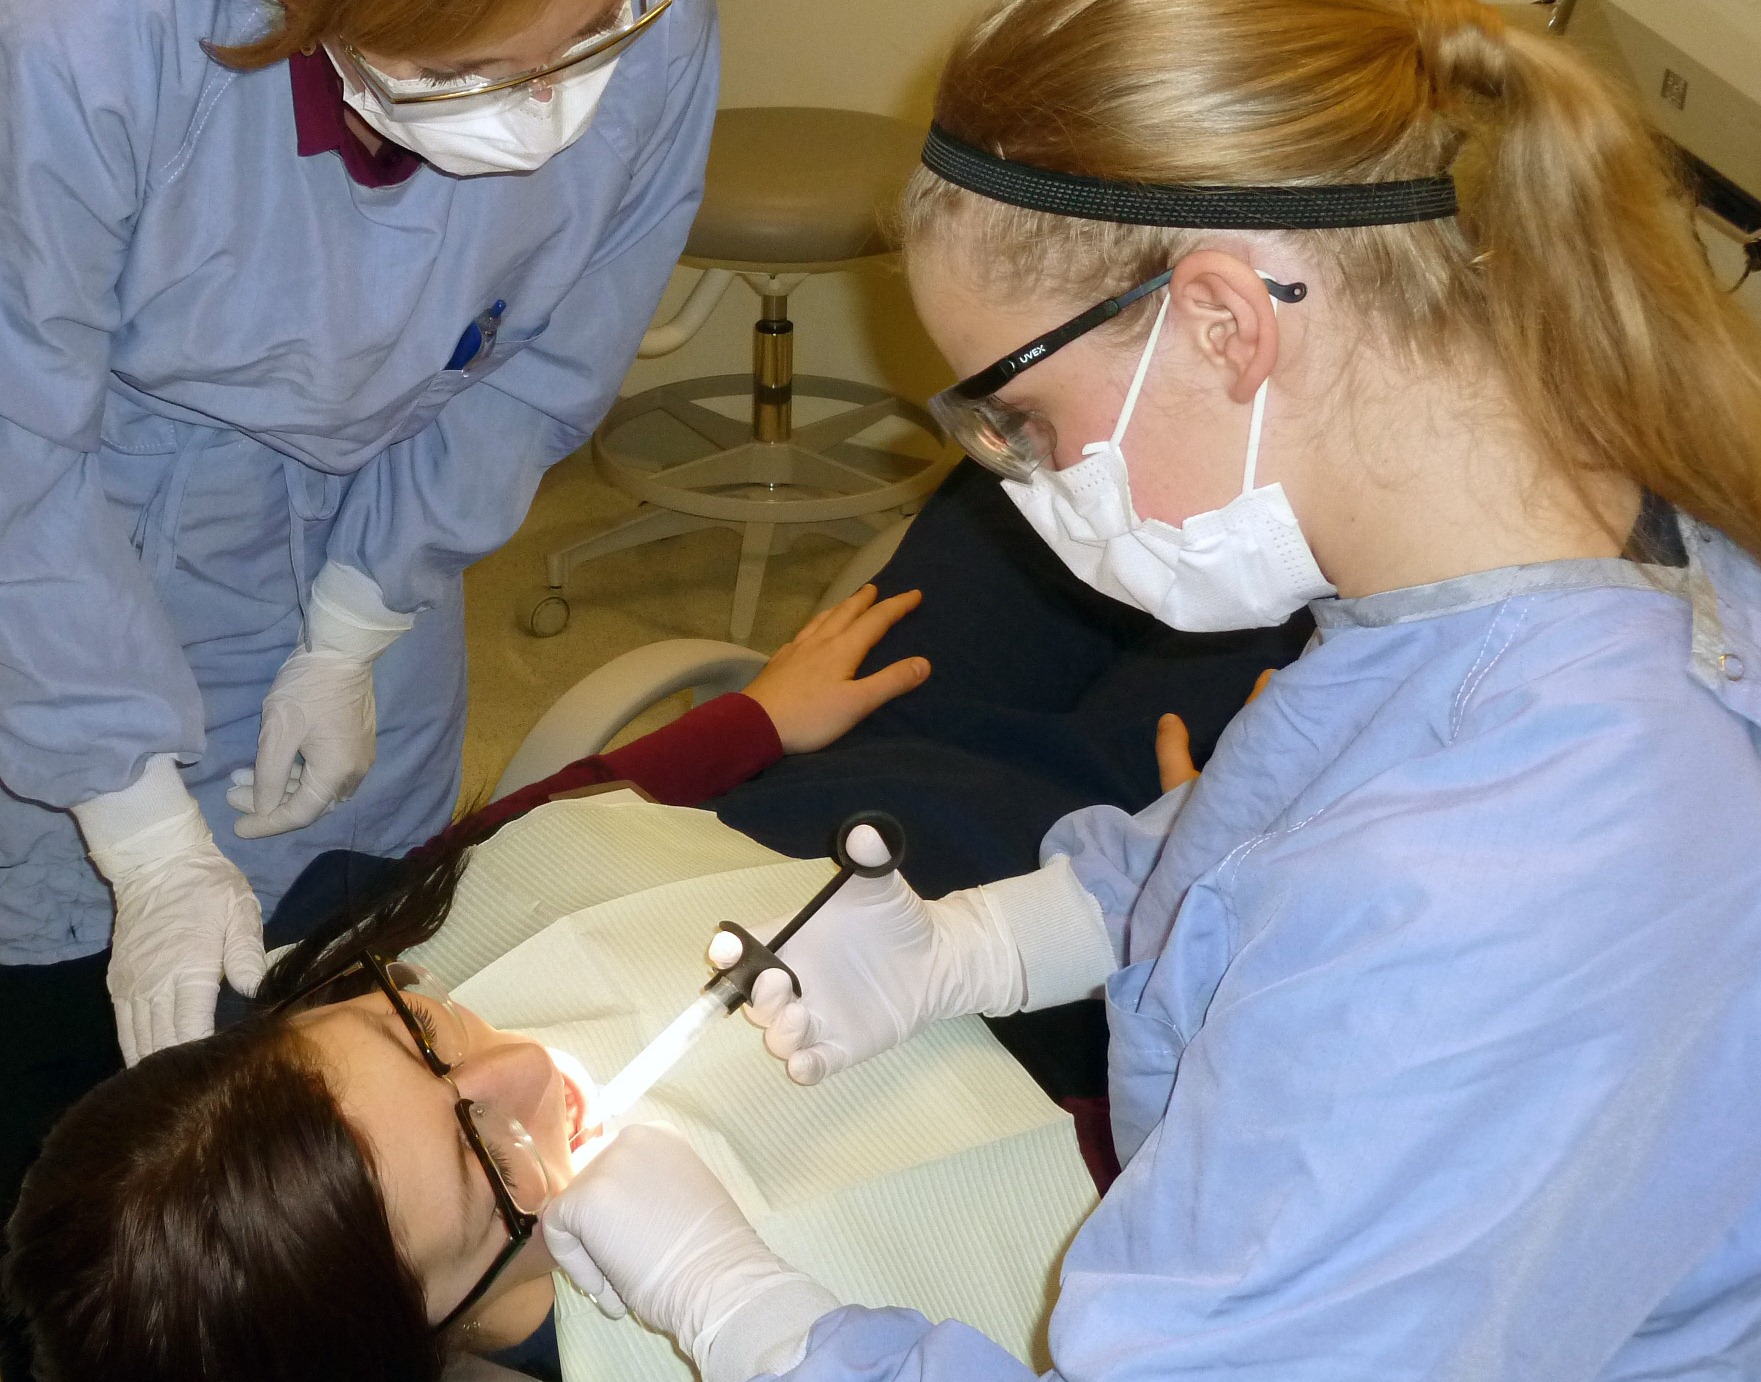 Dental Hygiene students work on a patient